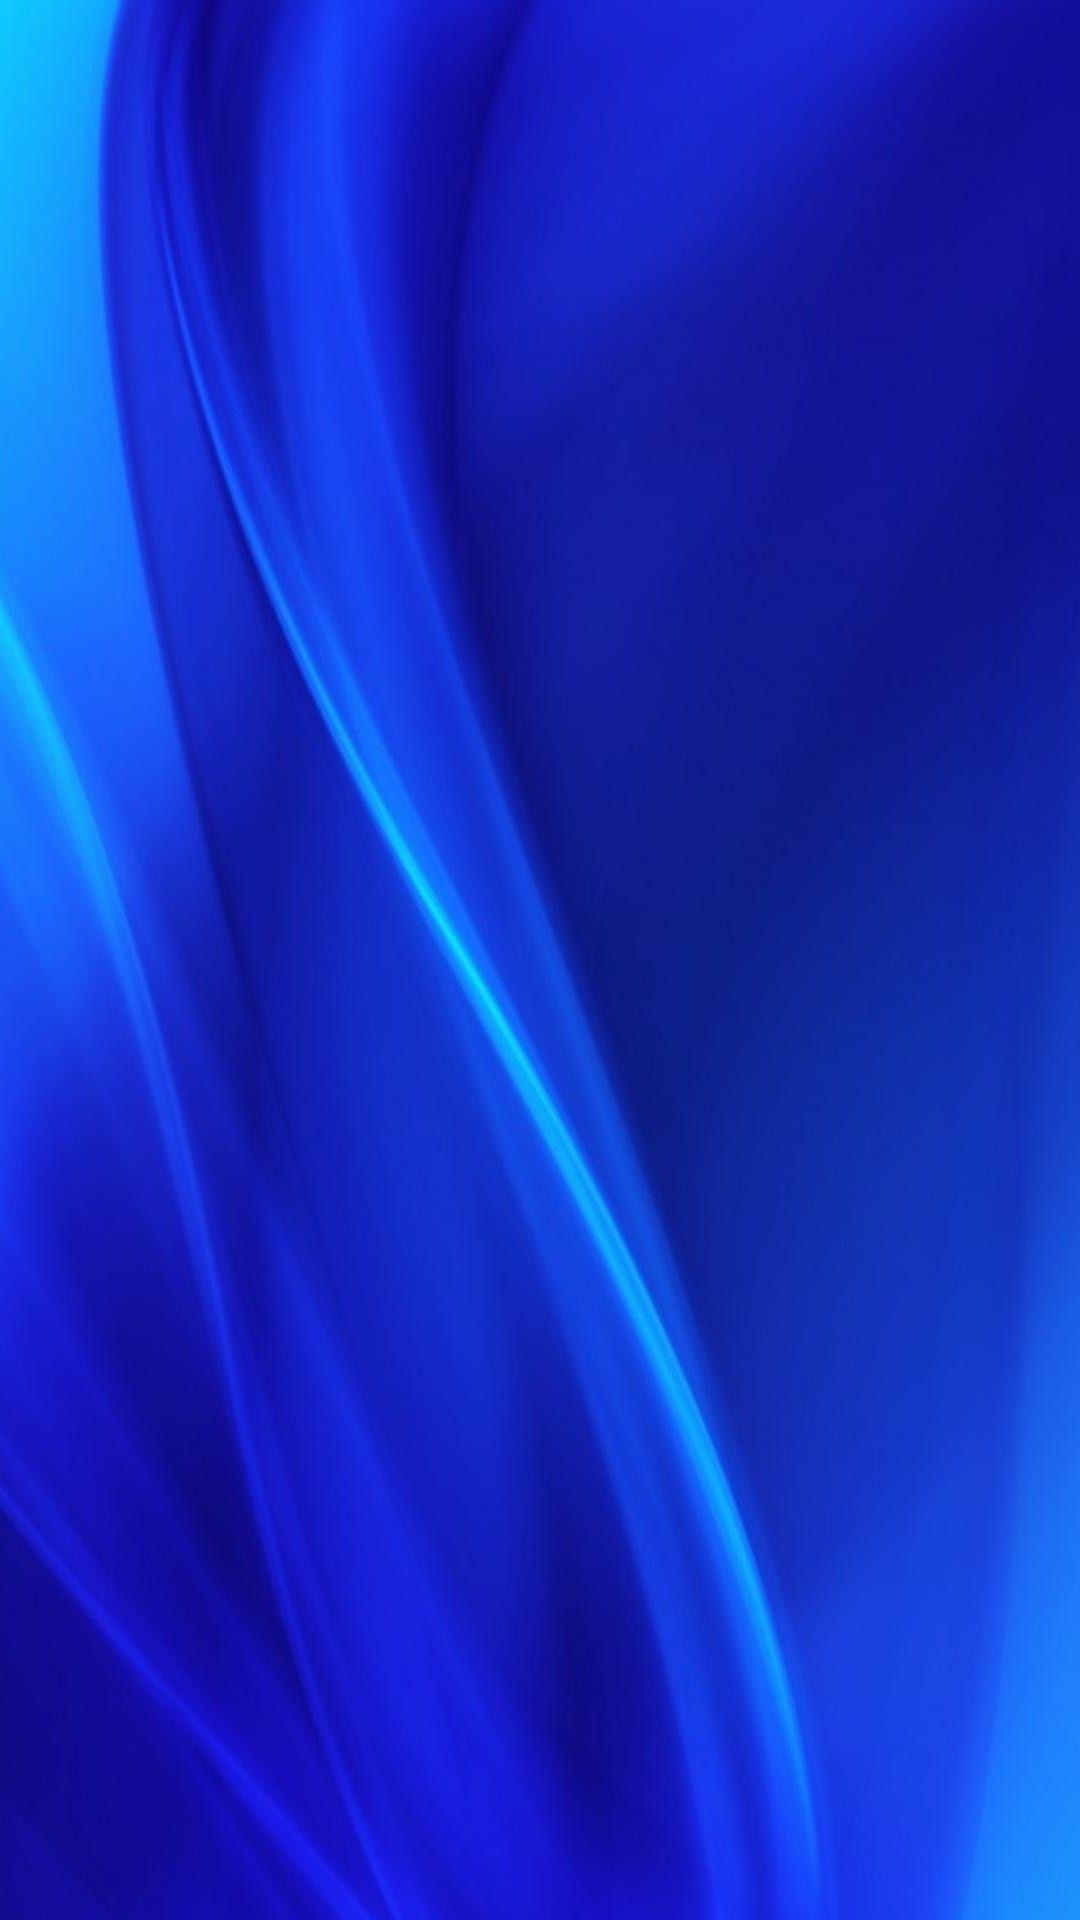 Blue Abstract Wallpapers  HD Wallpapers  ID 24379